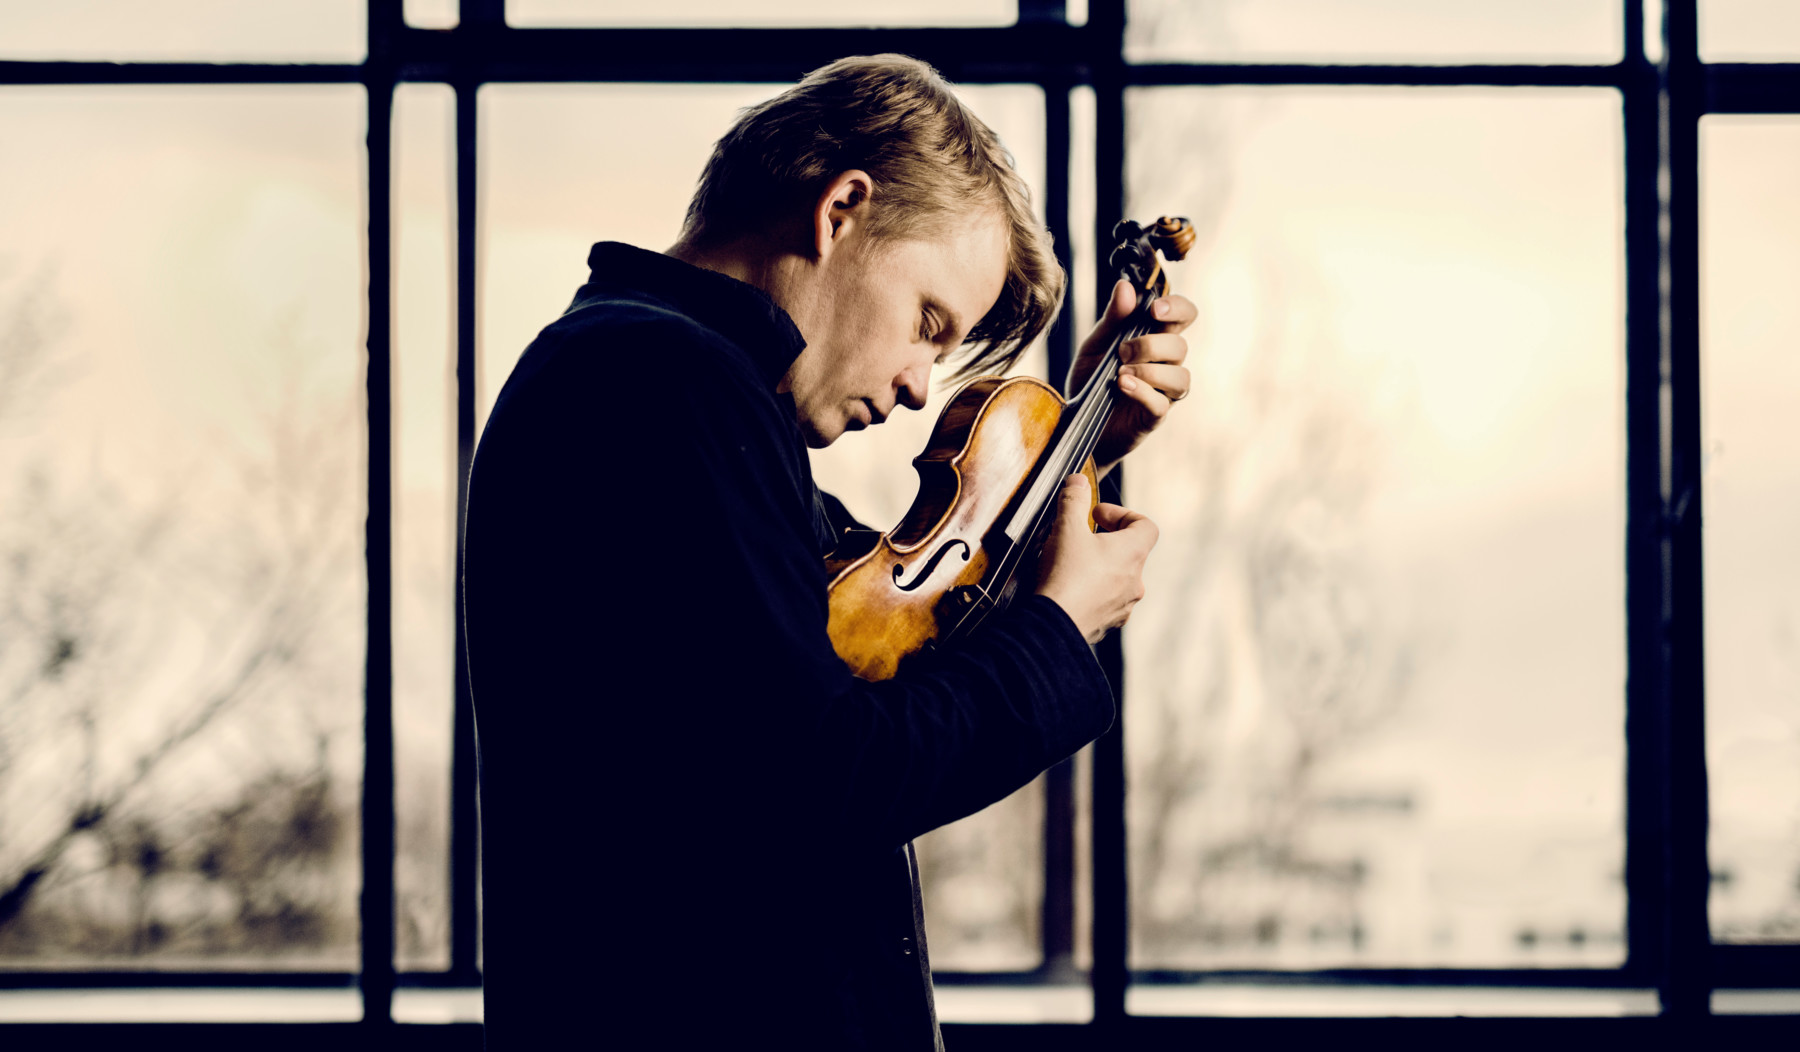 Violinist Pekka Kuusisto strums his violin without a bow in front of a window.